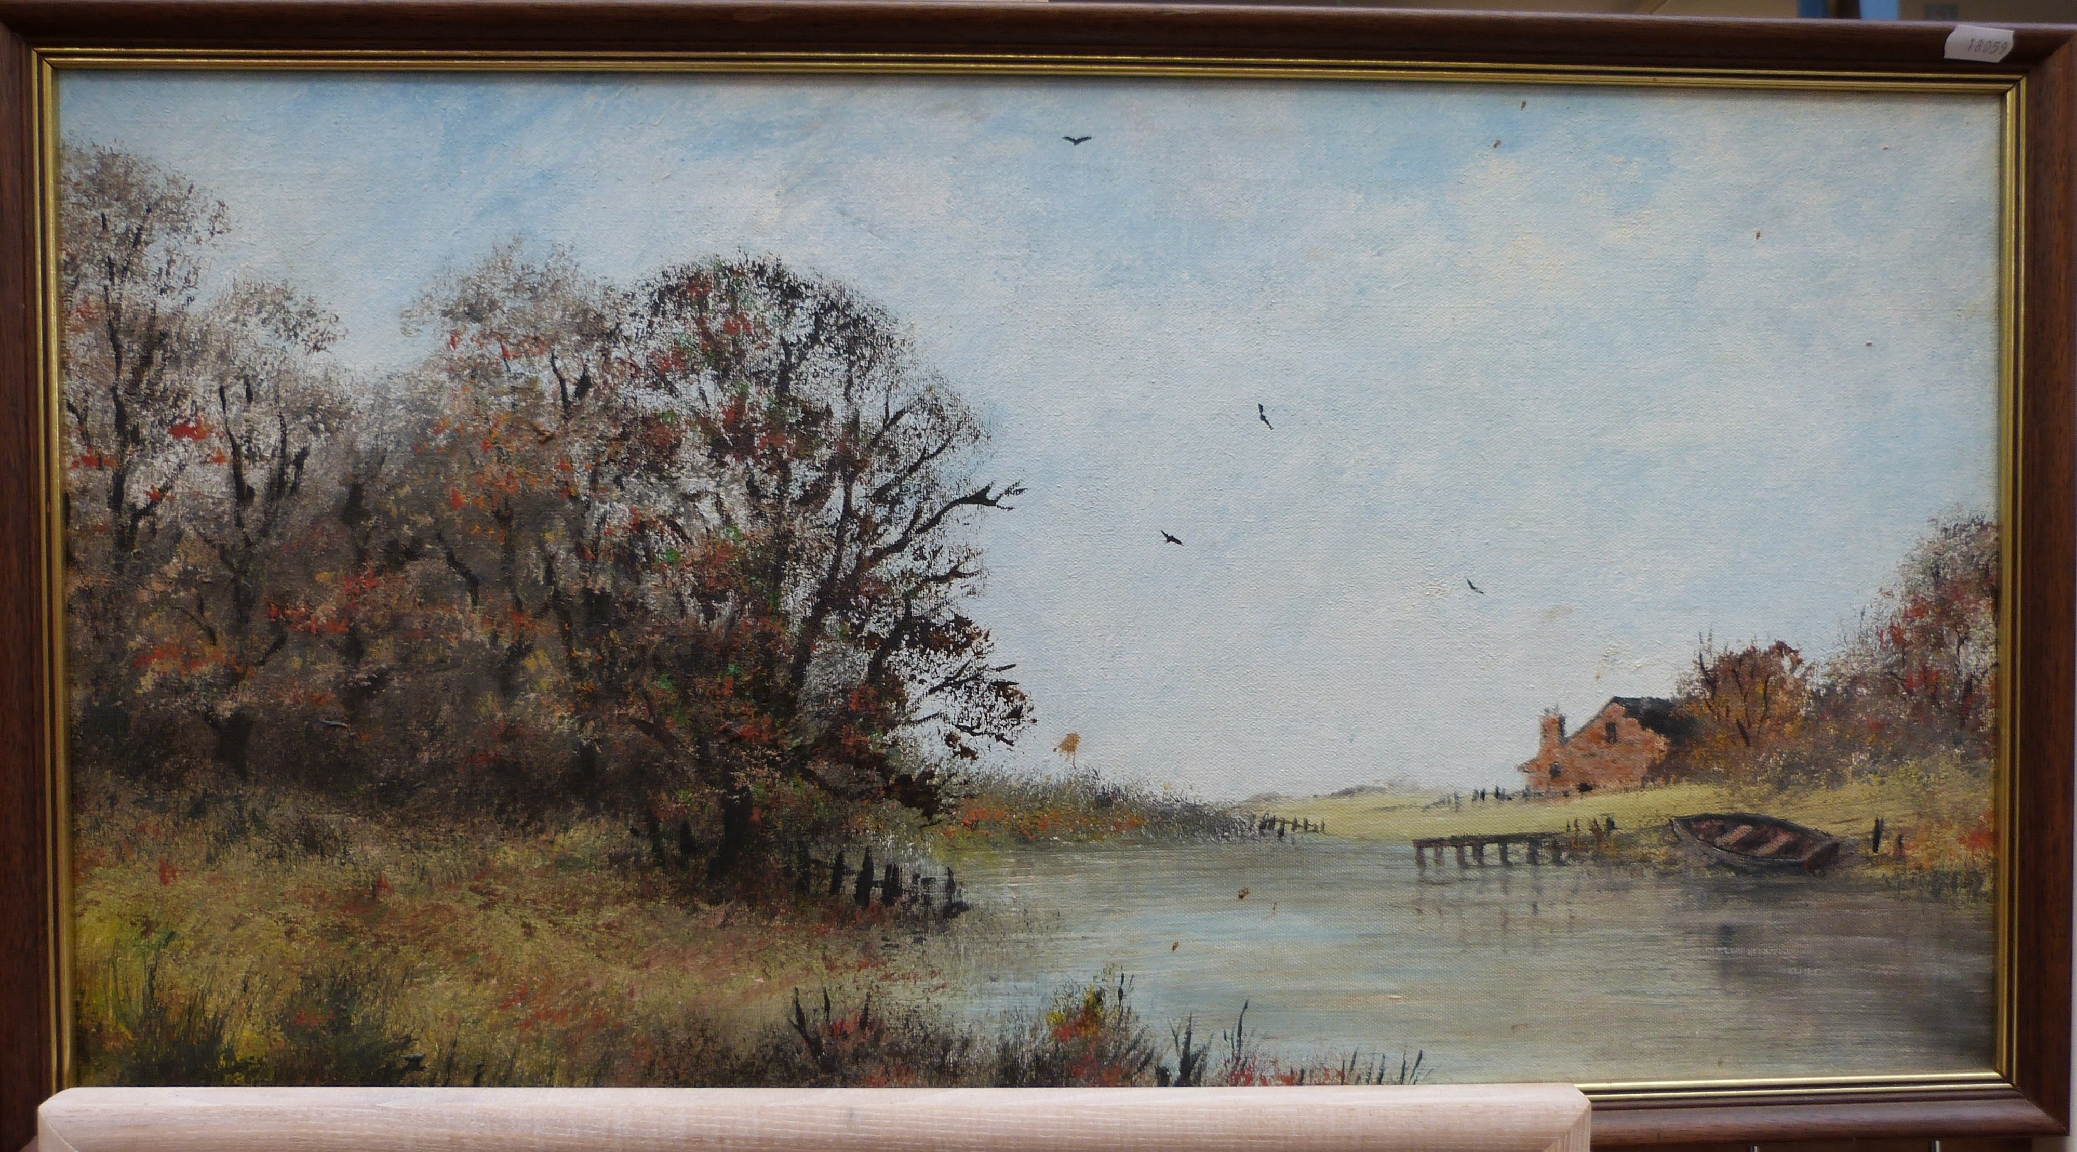 Digby Page 'Autumn Peace' oil on canvas - Image 2 of 2